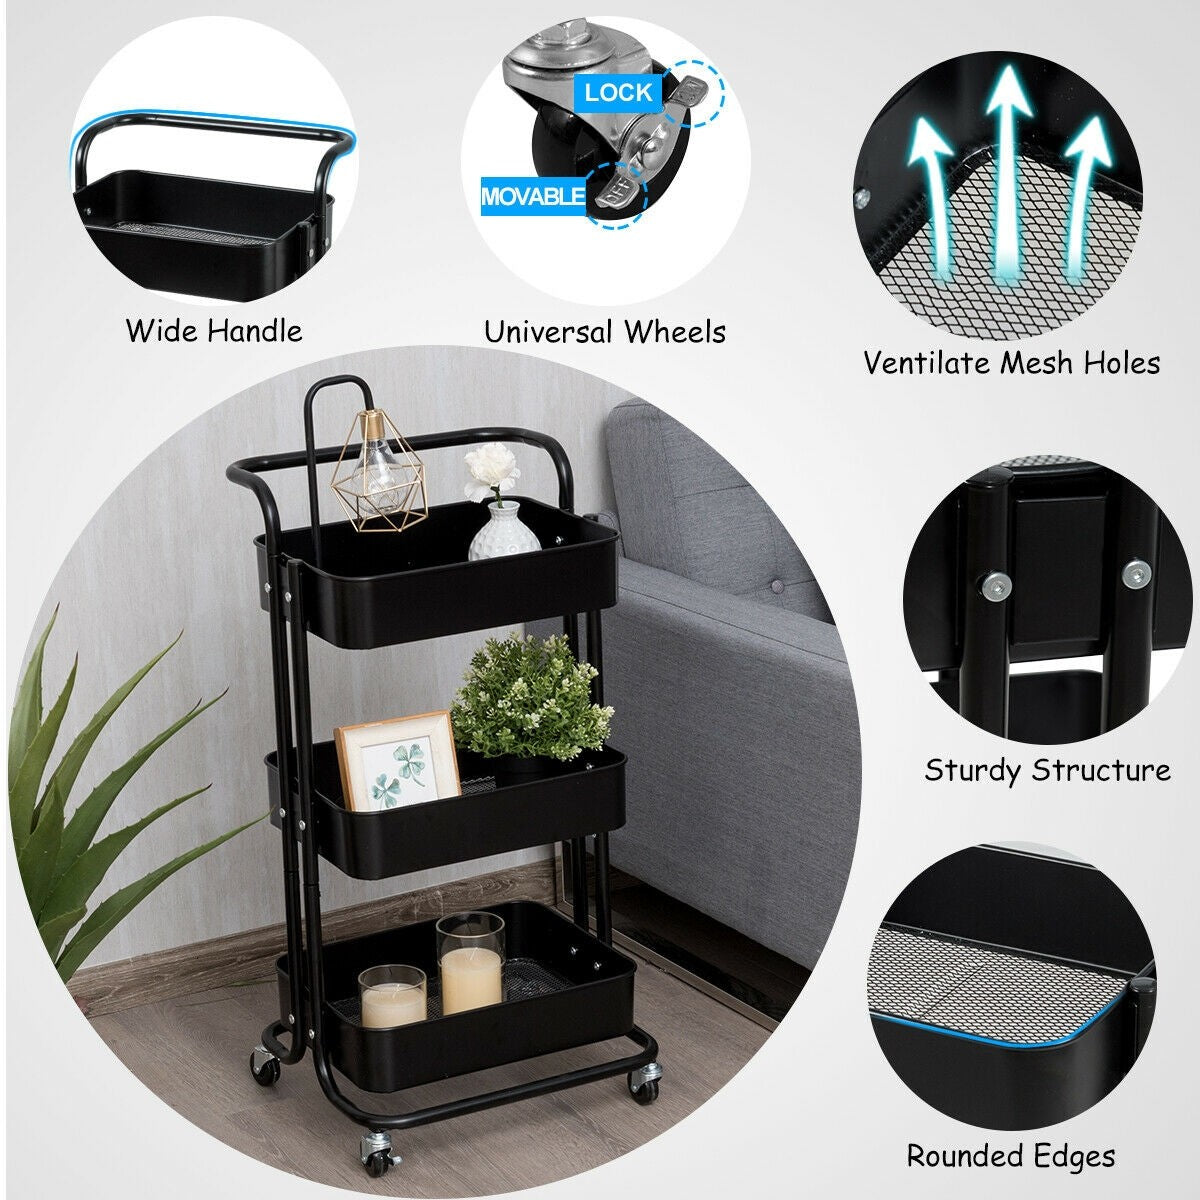 Giantex 3-Tier Rolling Cart, Lockable Casters and 3 Mesh Storage Baskets